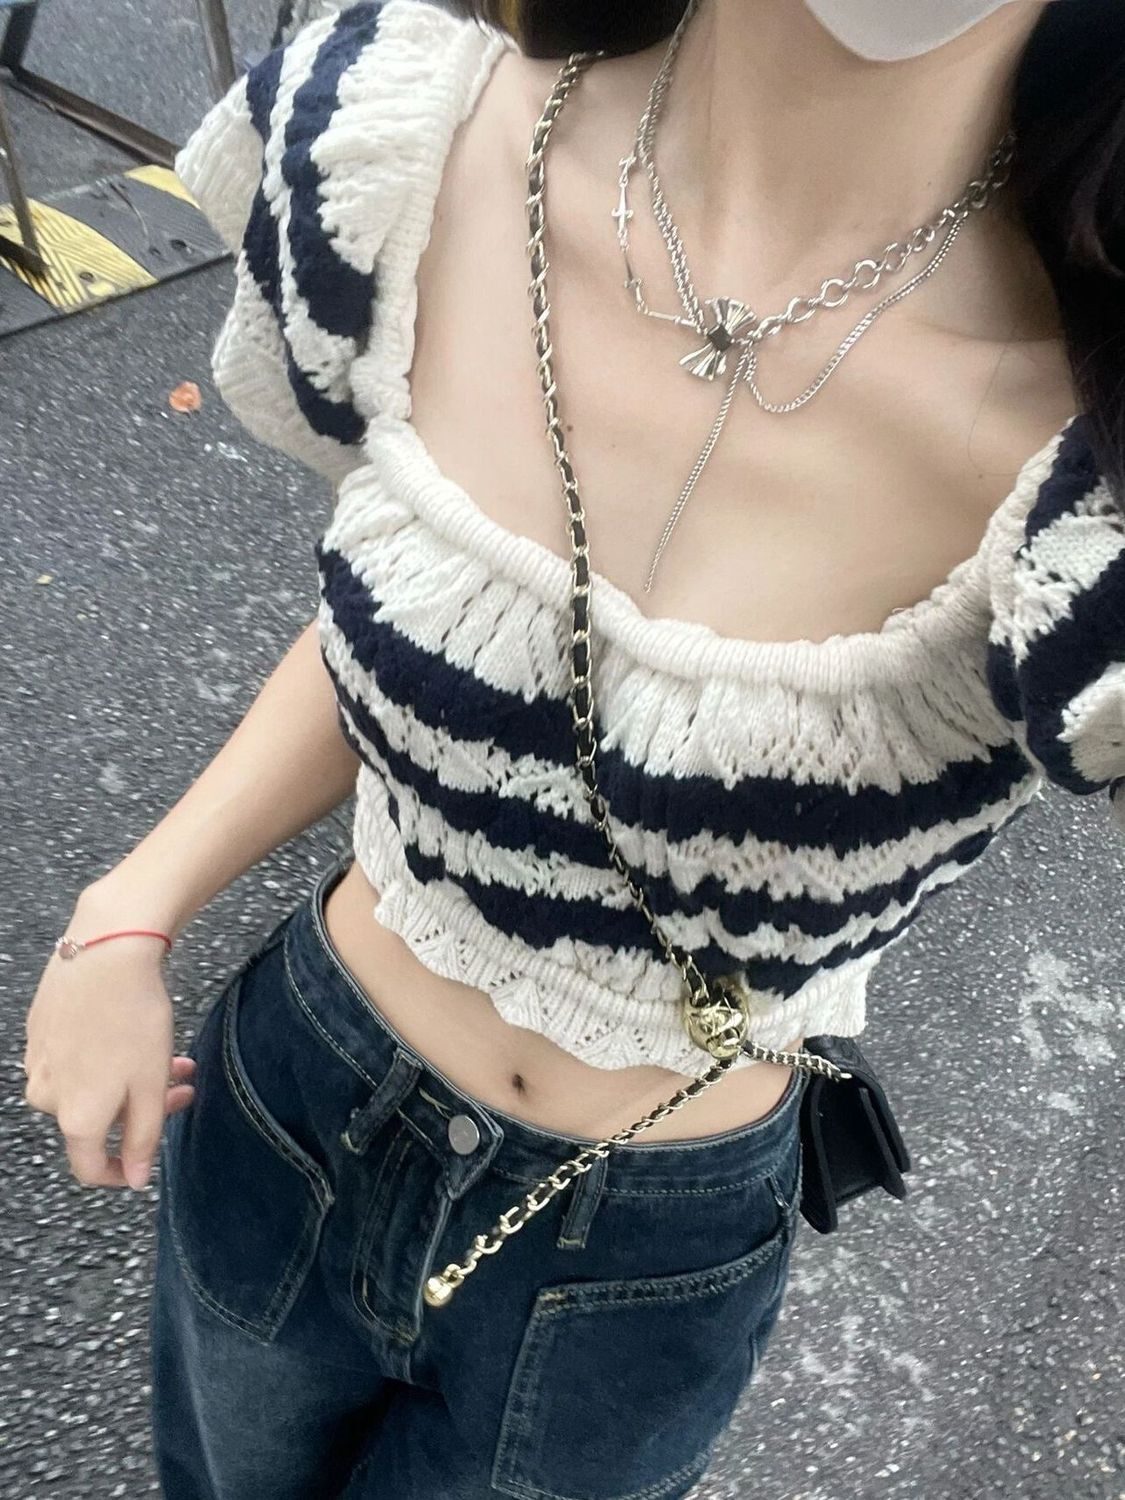 2022 new Korean style gentle wind design sense square collar navel short-sleeved top small flying sleeve striped knitted small shirt for women